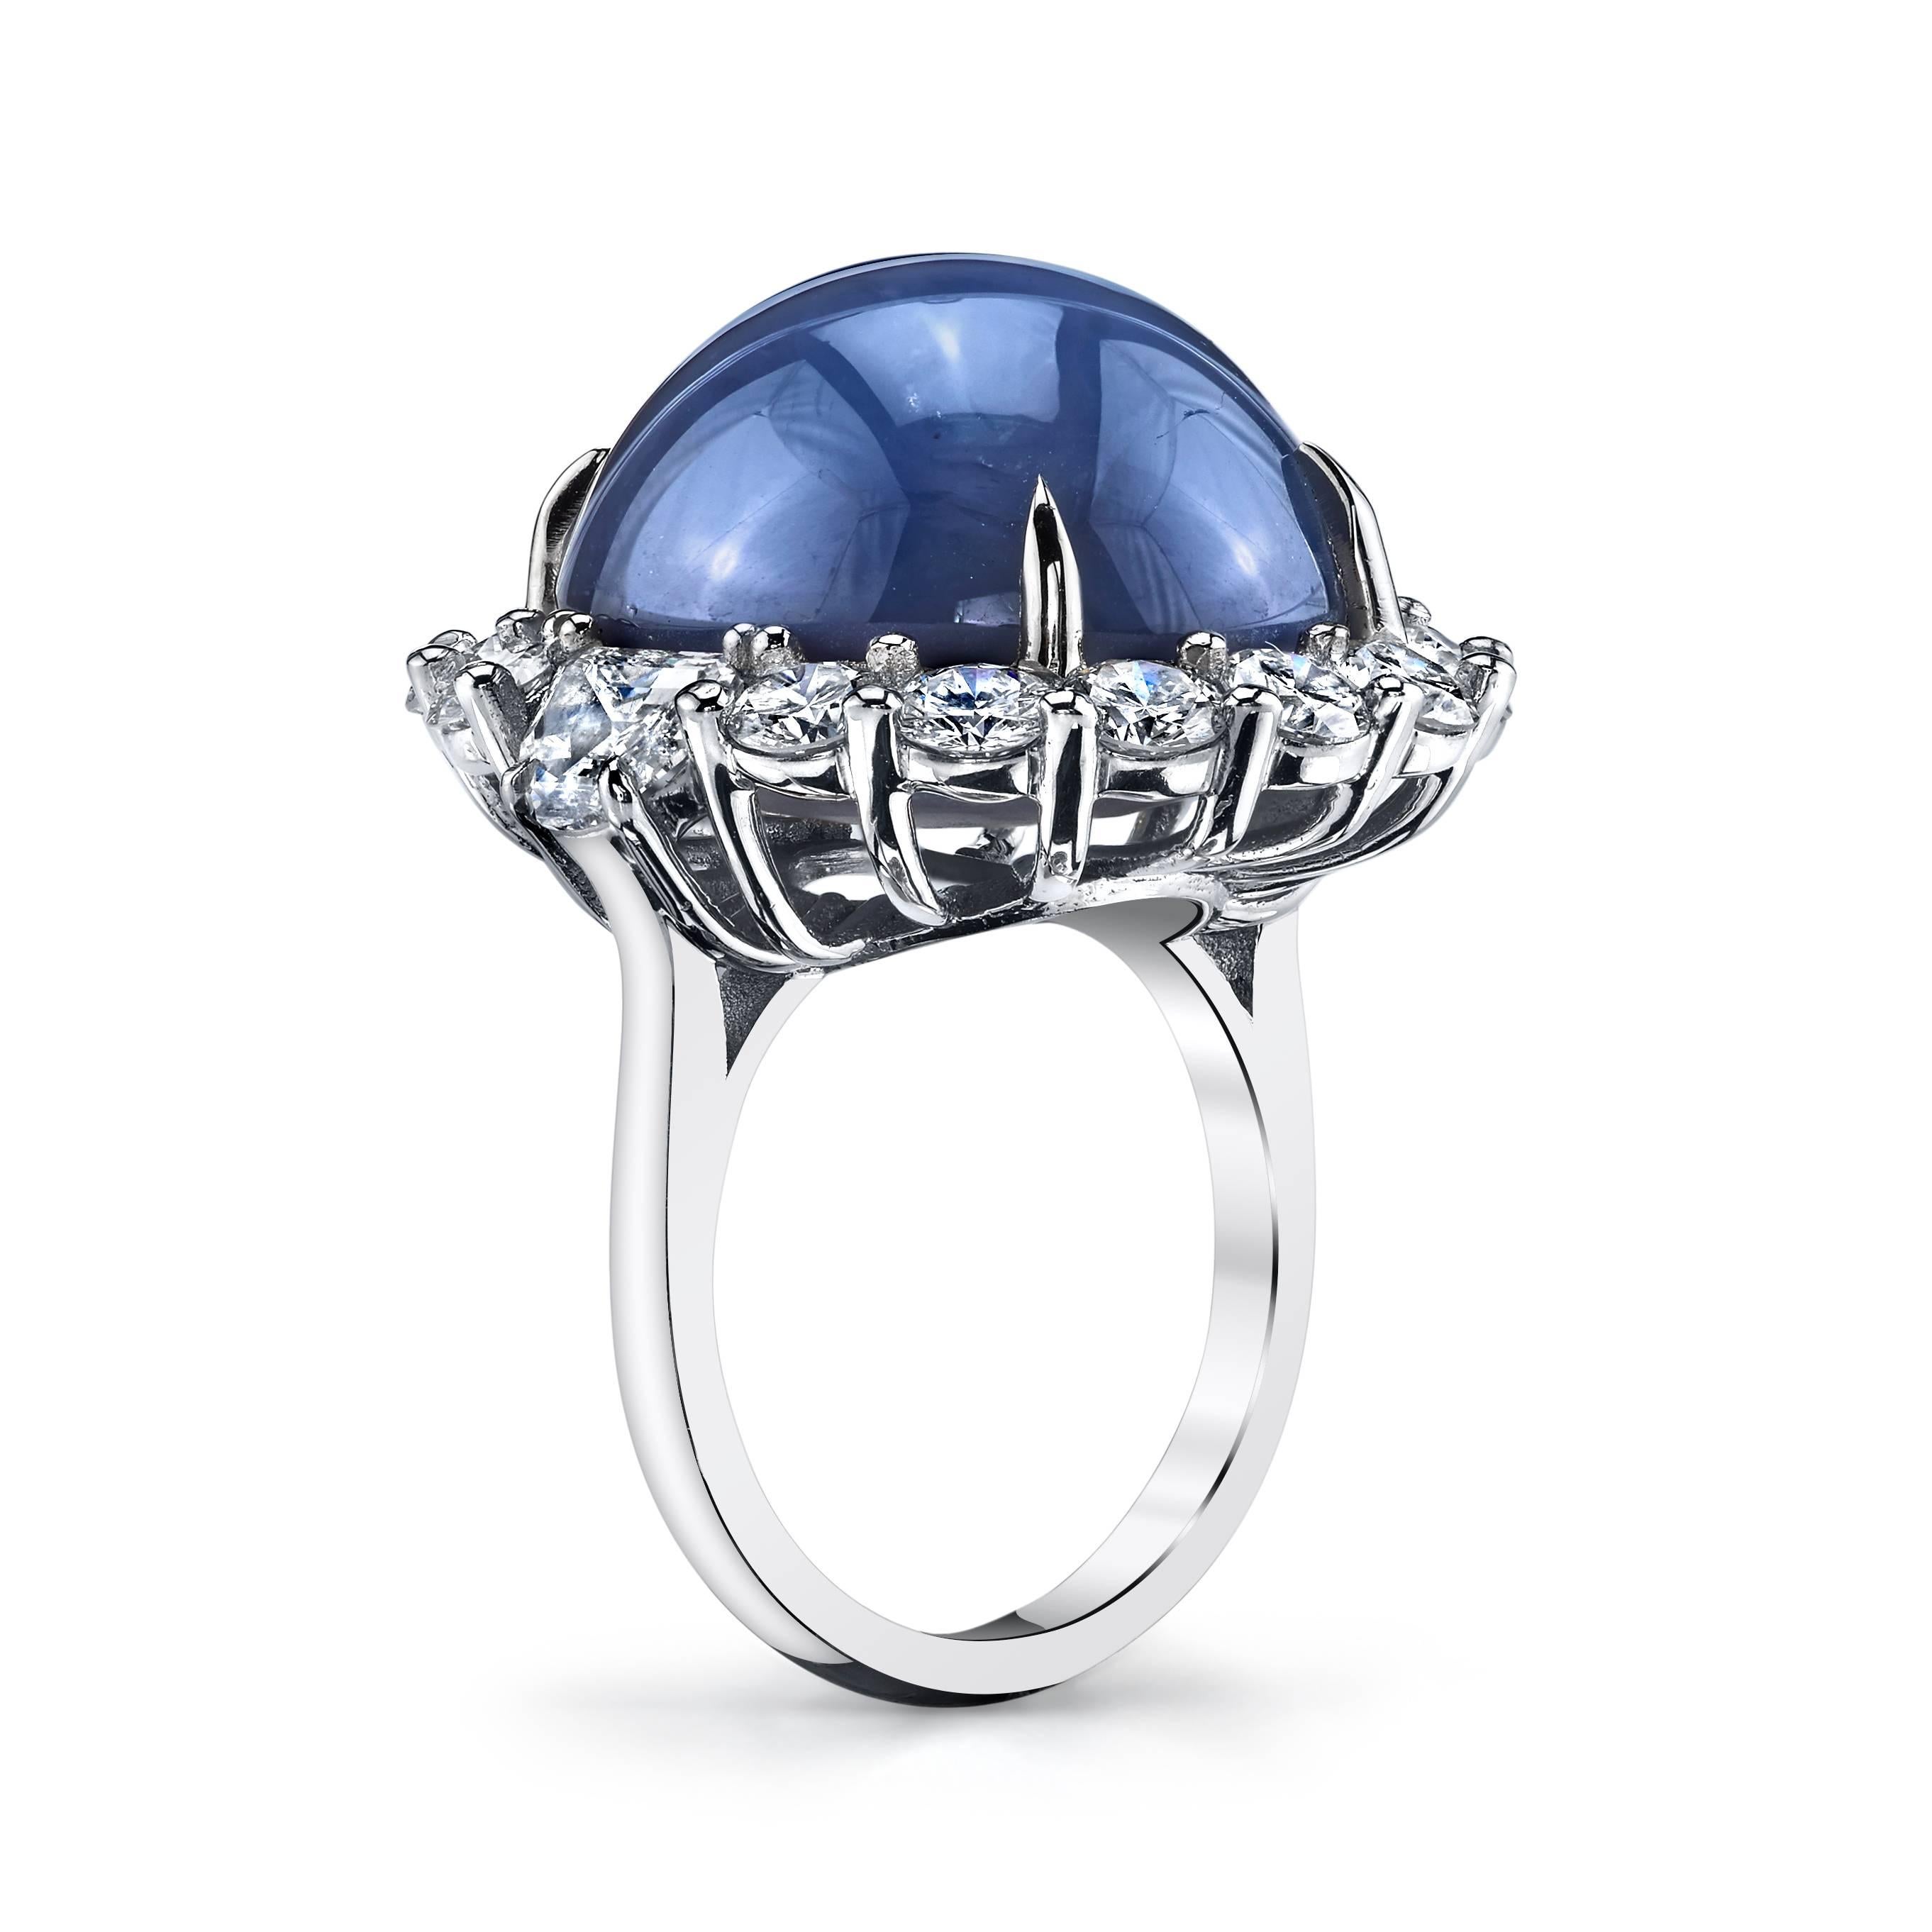 This phenomenal ring features an impressive gem quality 47.37 carat star sapphire with strong asterism (6 ray star effect). A halo of 4 carats of colorless VS quality diamond surround the impressive sapphire, set in platinum. 